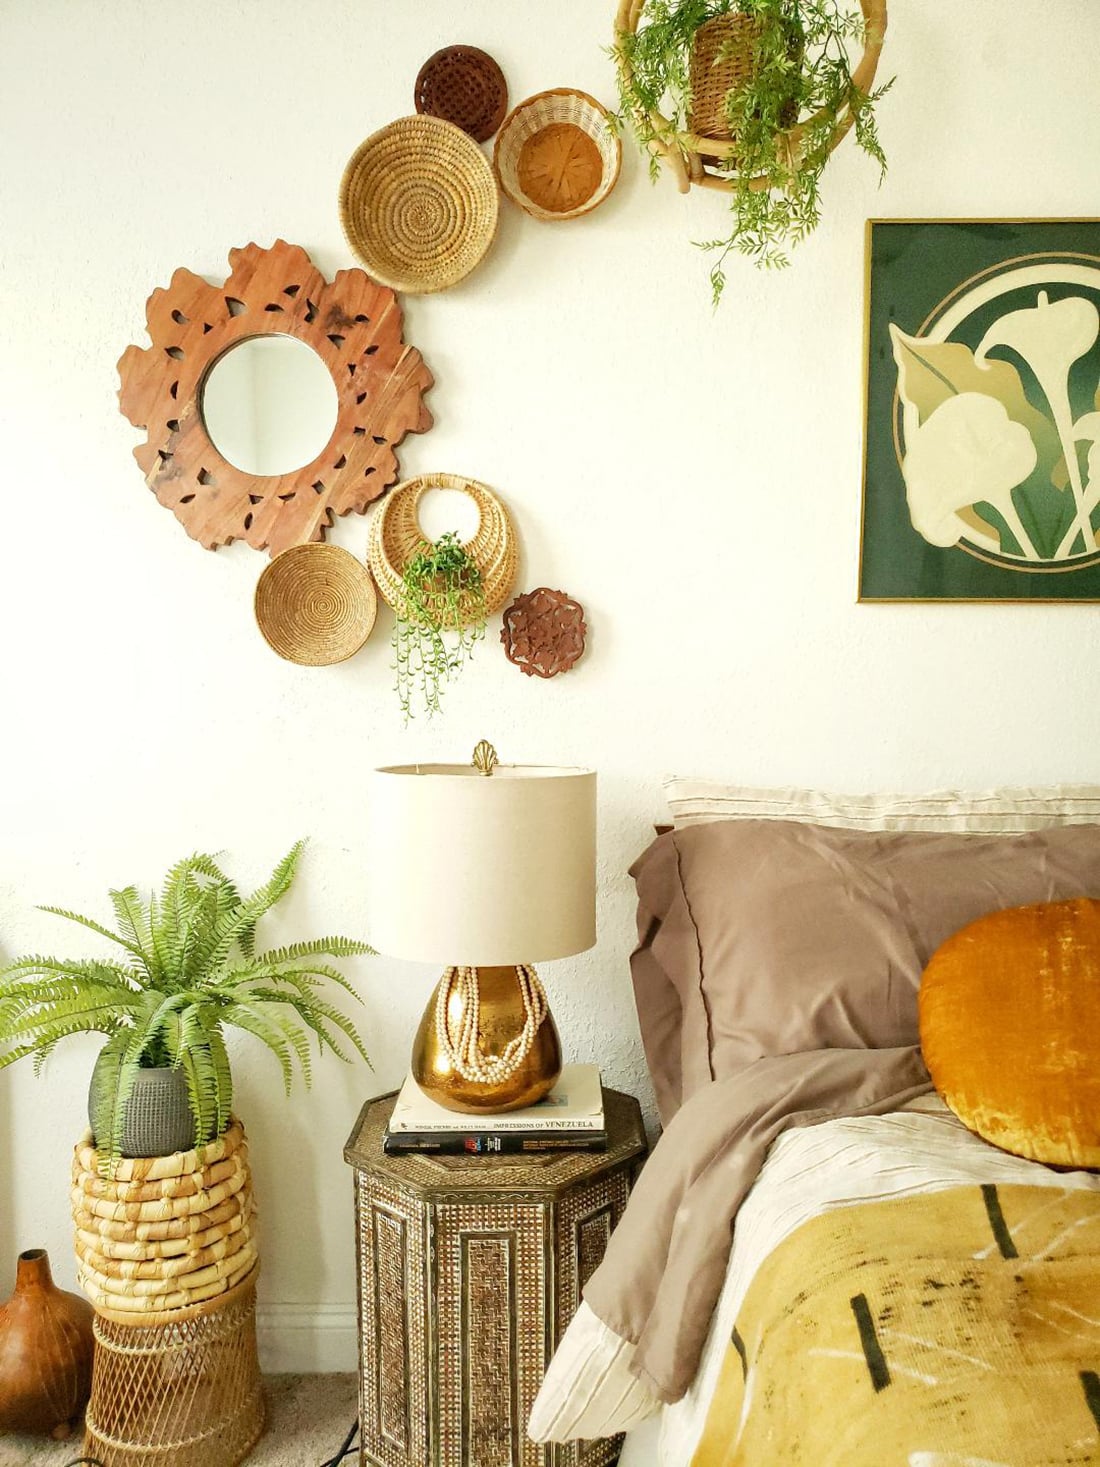 Thrifty Bohemian Decor • Wall Around the World • Little Gold Pixel • All photos © Tracey Hairston • Come inside Tracey's Virginia home and get the secrets of her thrifty bohemian gallery walls in the latest installment of Wall Around the World. #thrifty #bohemian #boho #decor #gallerywalls #gallerywallideas